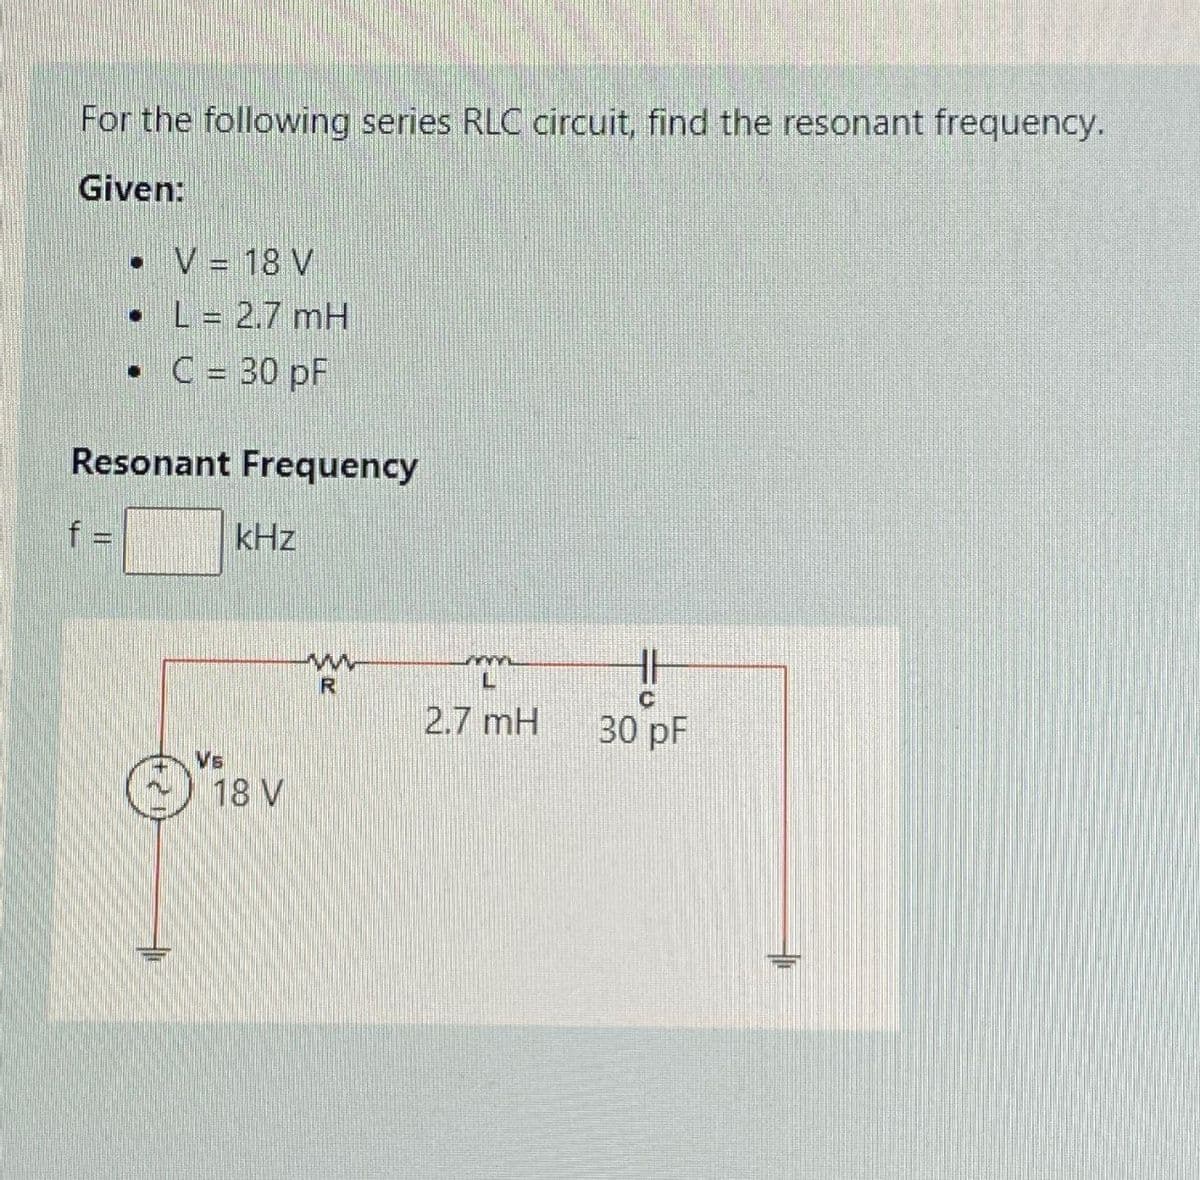 For the following series RLC circuit, find the resonant frequency.
Given:
•
f
•
•
V = 18 V
L = 2.7 mH
C = 30 pF
Resonant Frequency
Vs
kHz
18 V
R
www.
2.7 mH
HE
C
30 pF